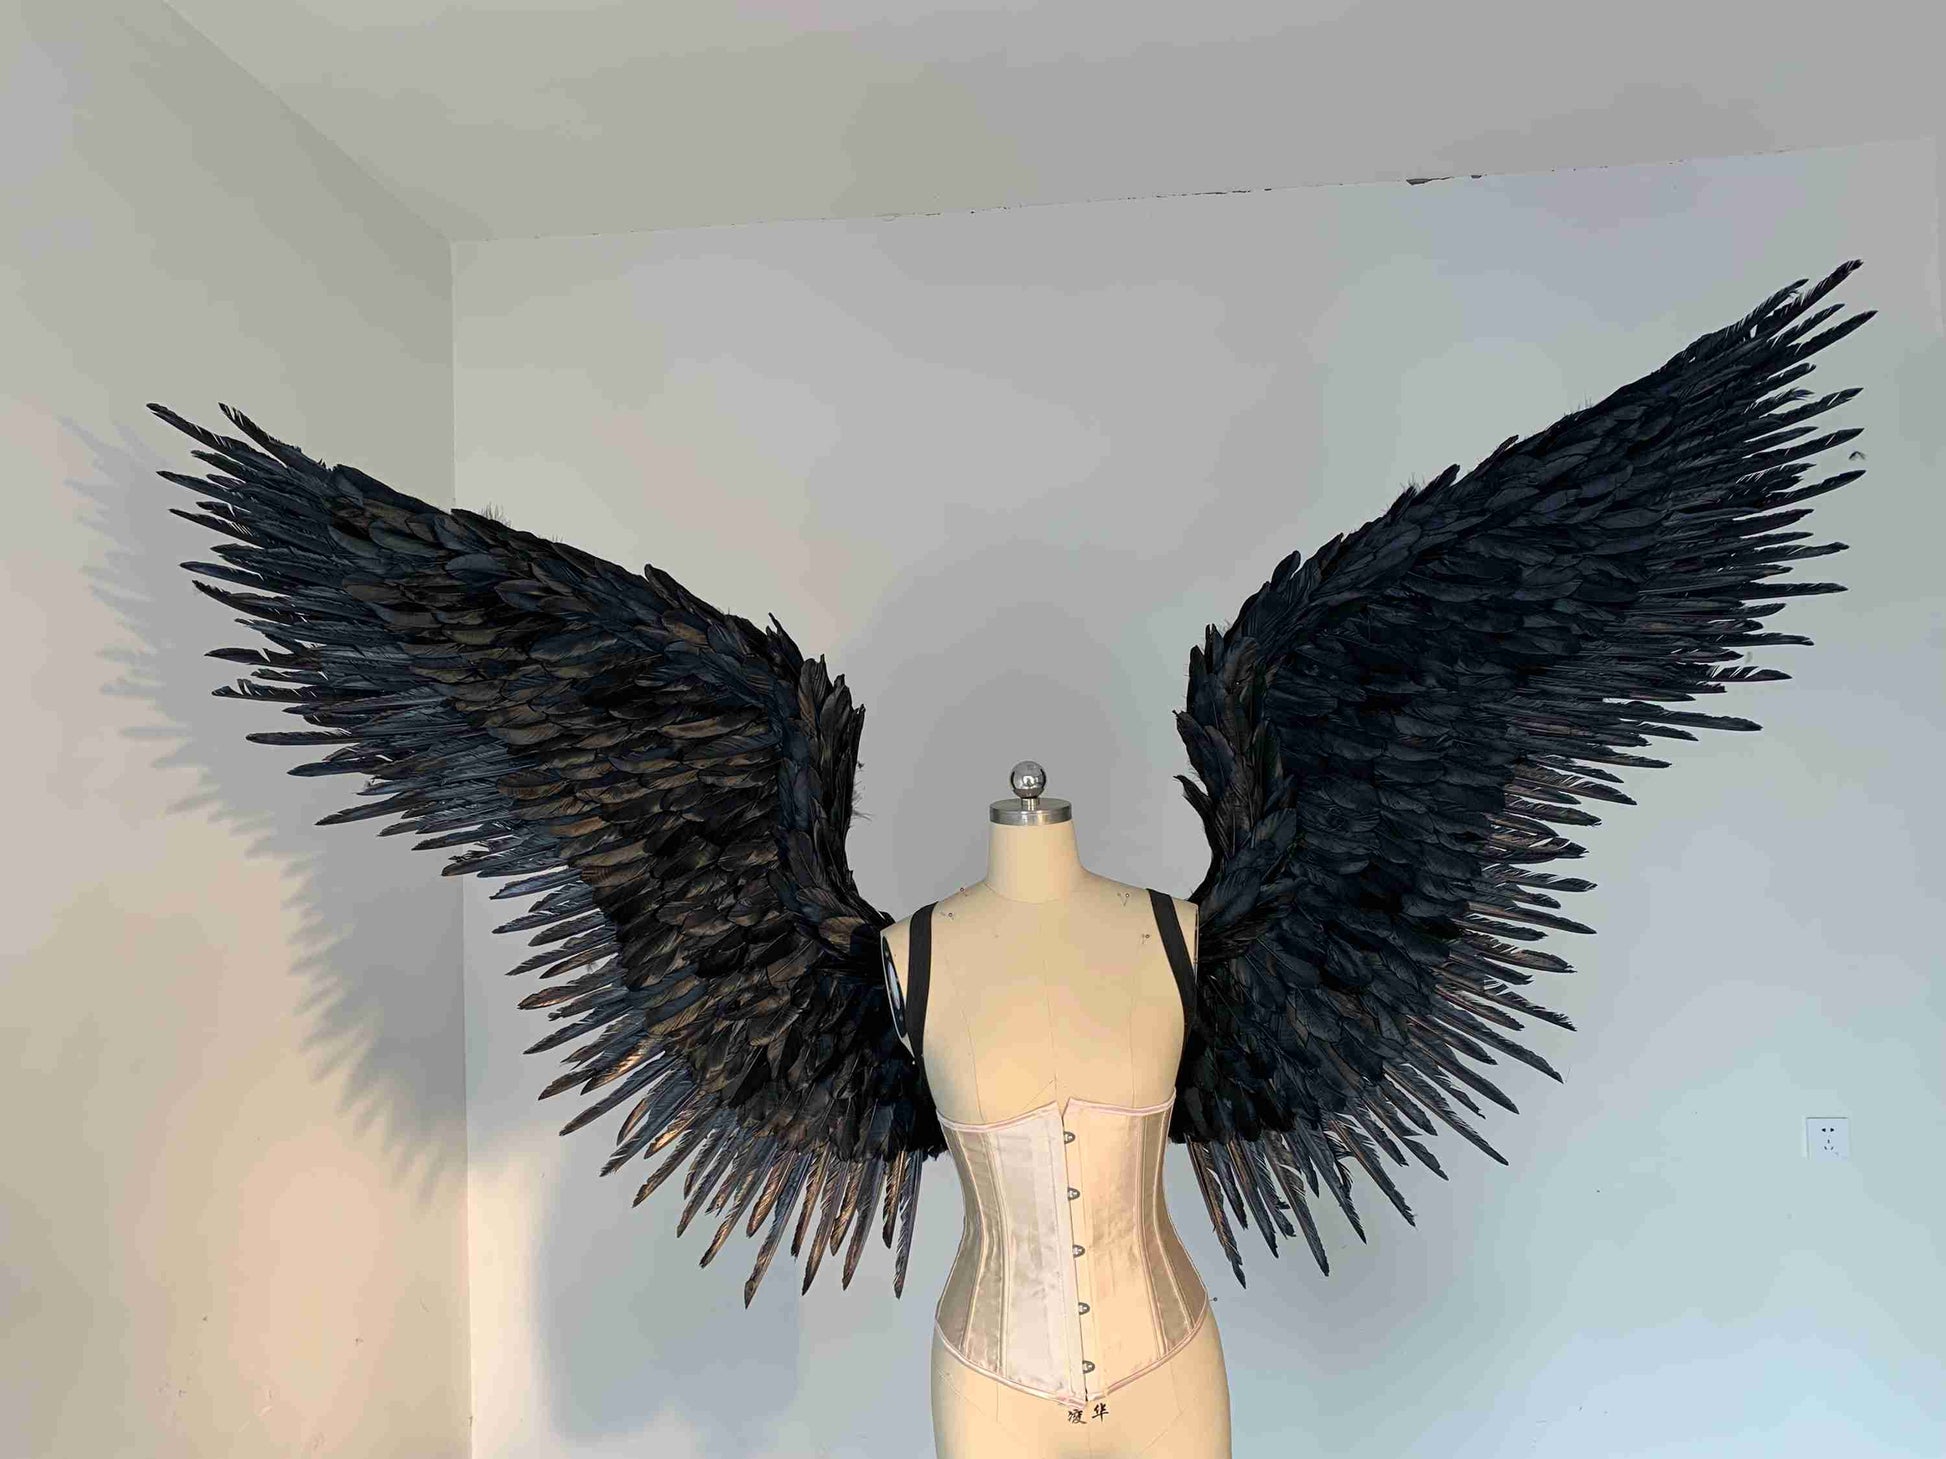 Our black color angel wings from the front. Made from goose feathers. Wings for angel costume or devil costume. Suitable for photoshoots.